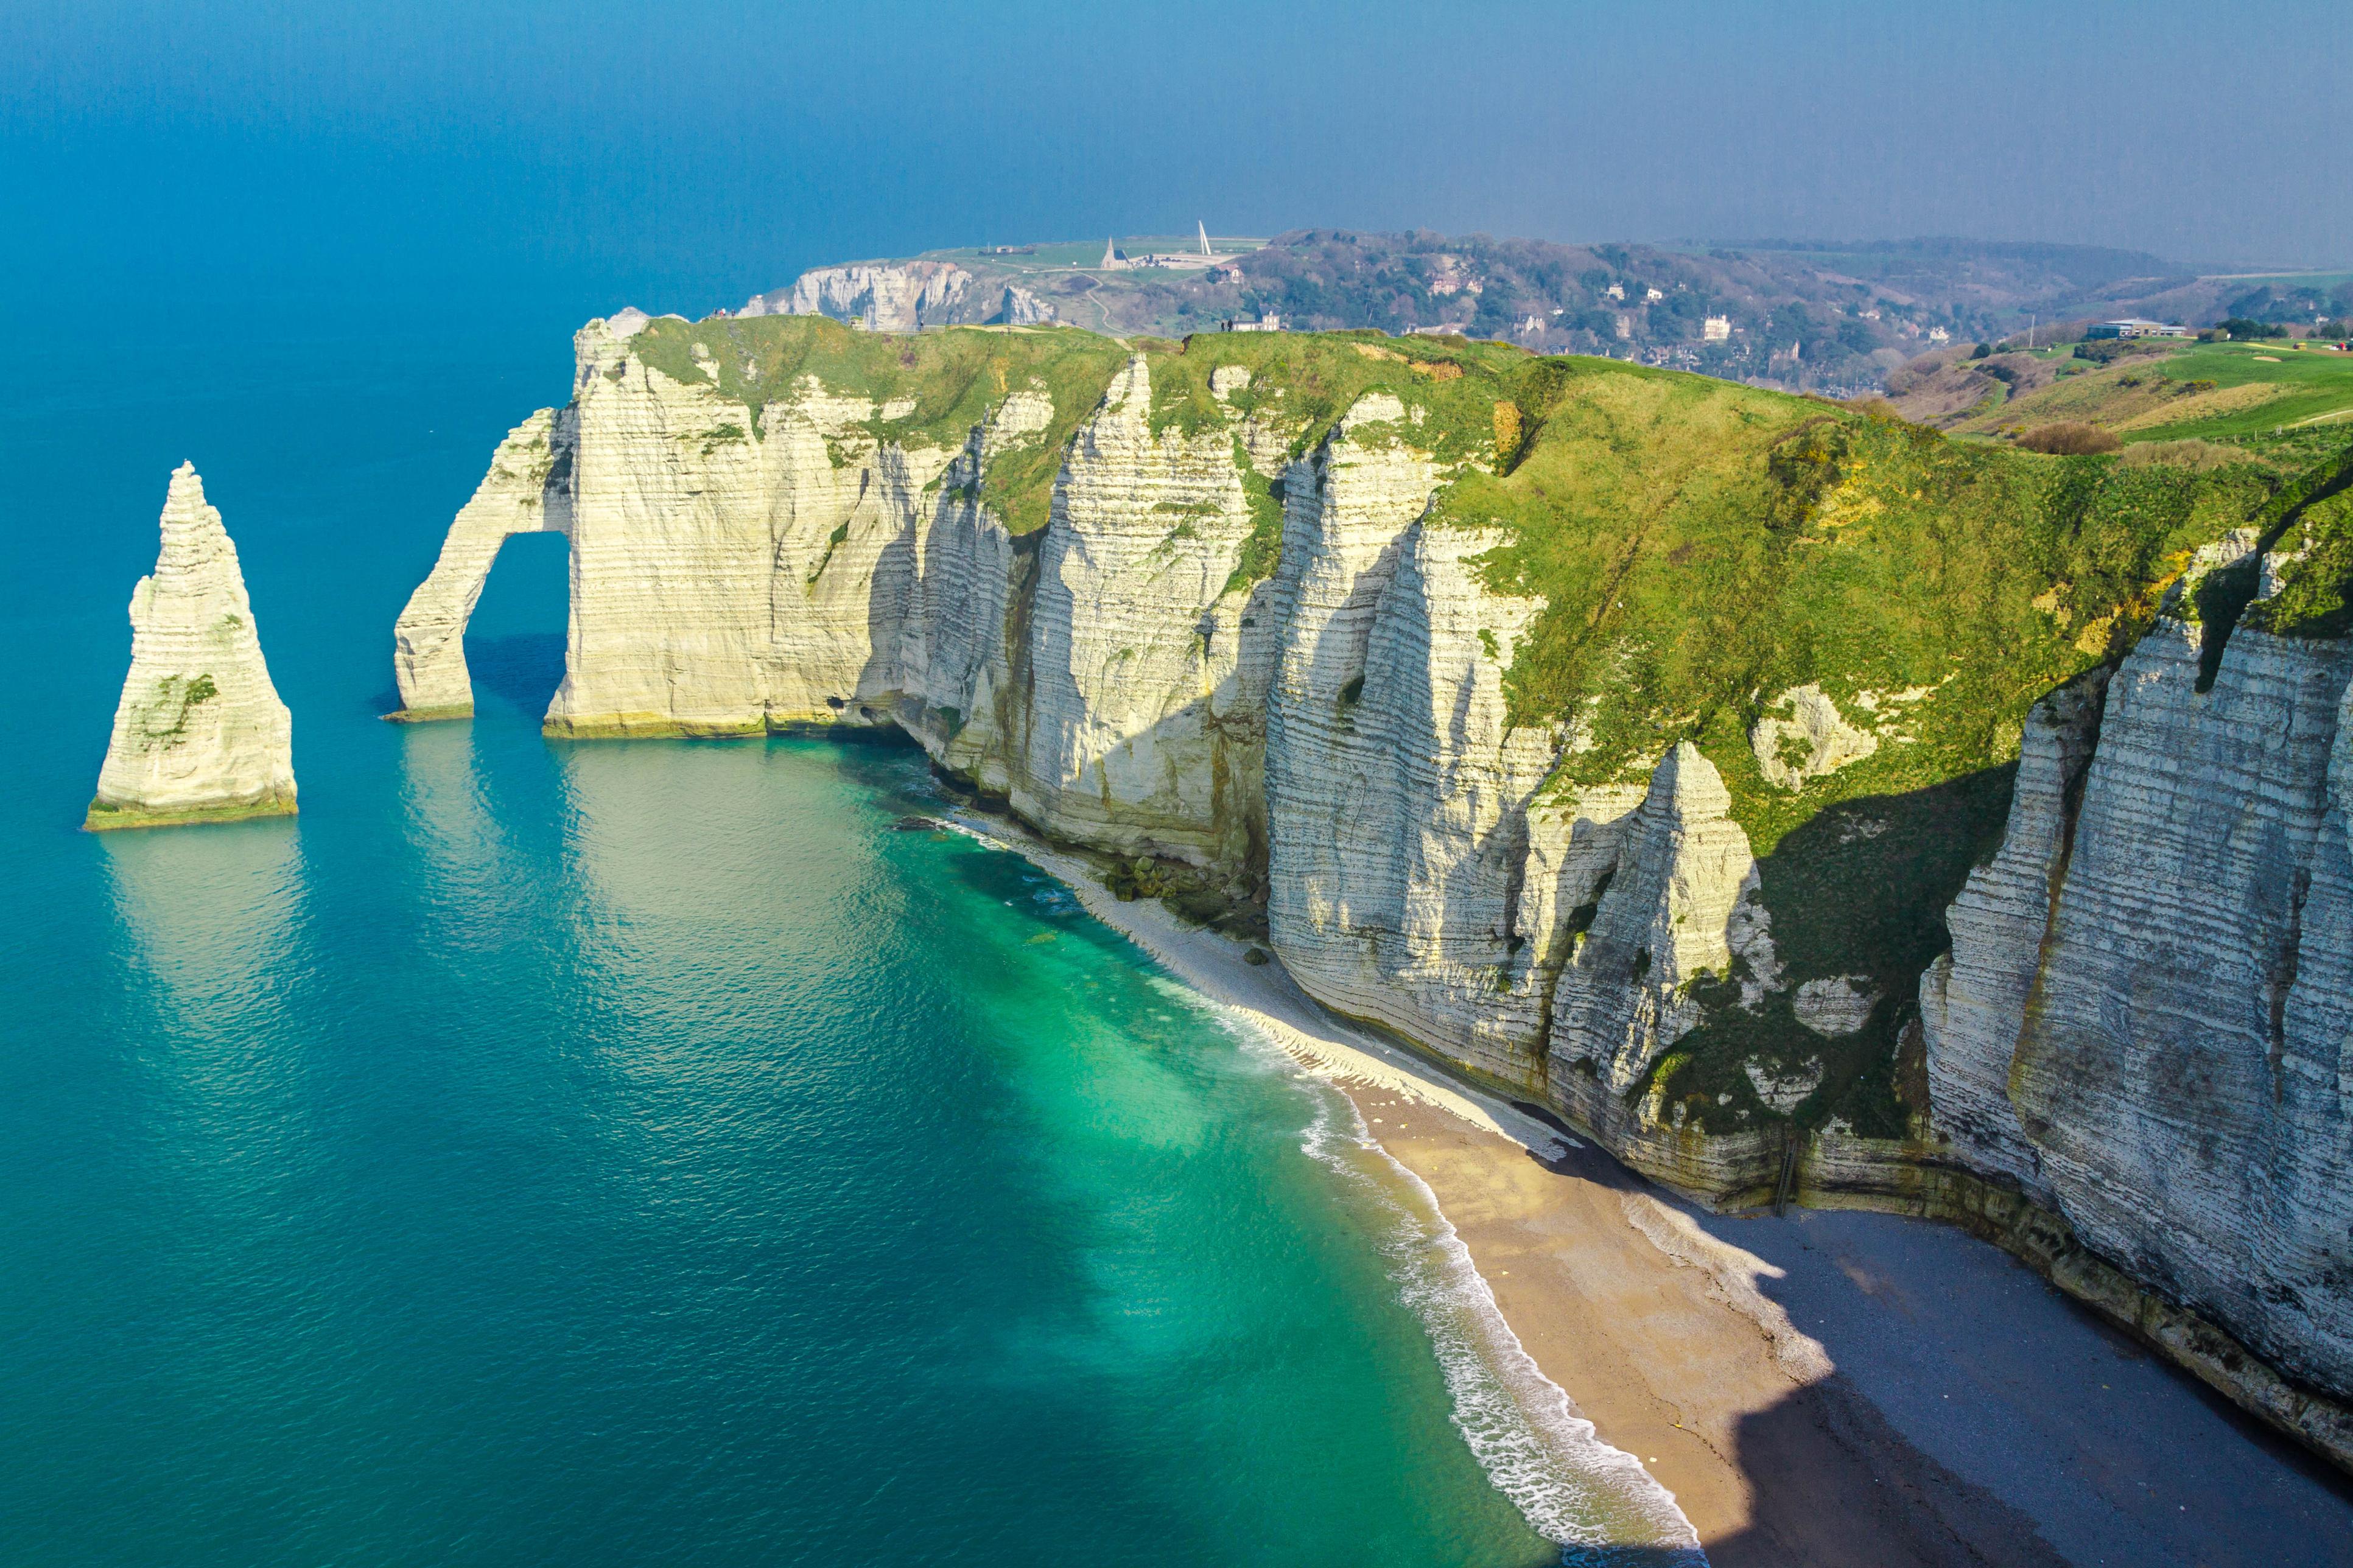 The 10 Best Normandy Tours & Trips 2018/2019 (with 53 Reviews) - TourRadar